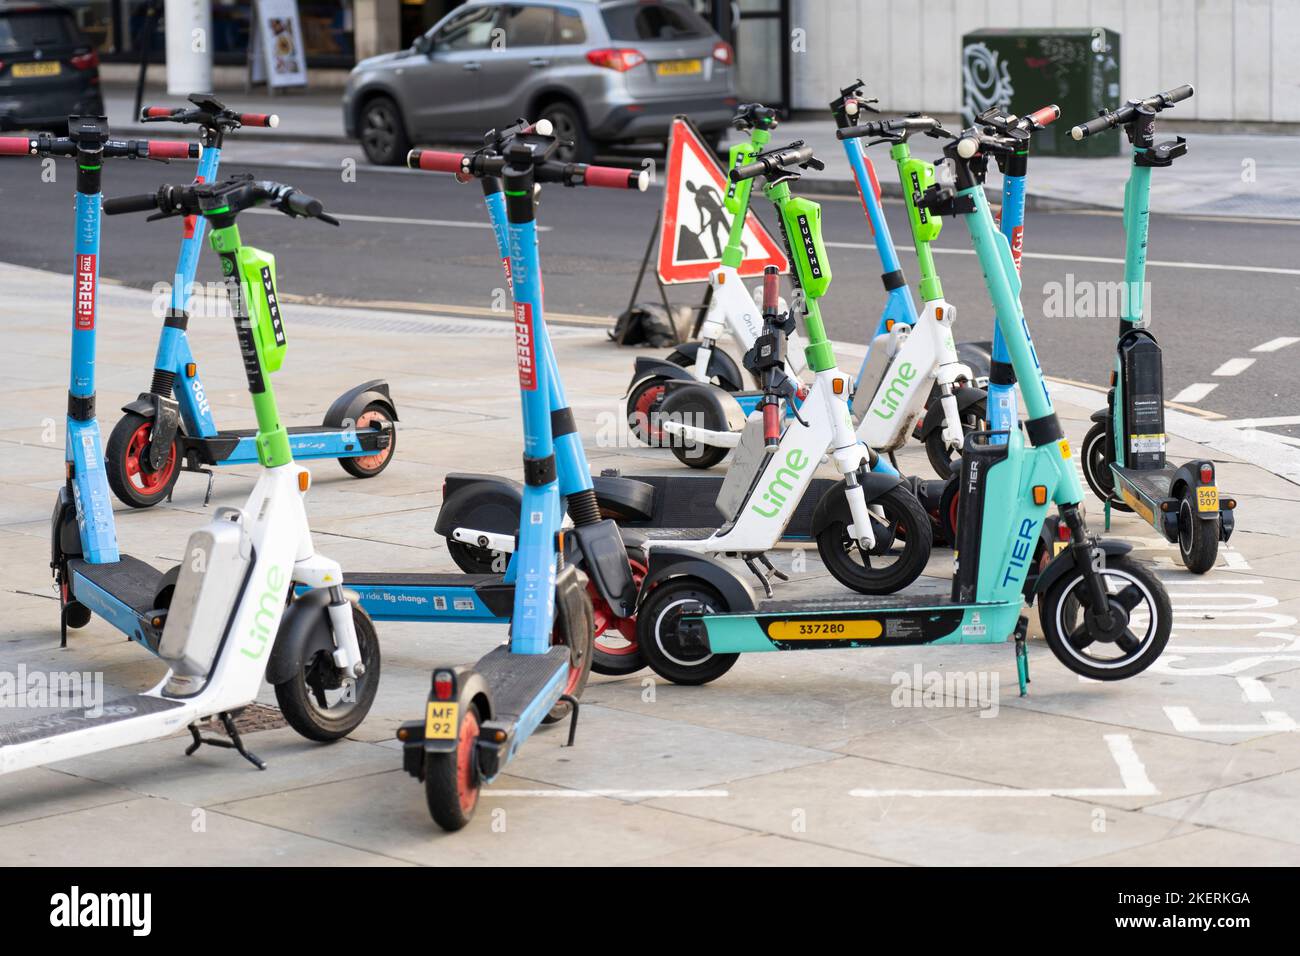 Transport for London and London councils have extended their trial of rental e-scooters across London in 2022, which are legal to ride on public roads Stock Photo